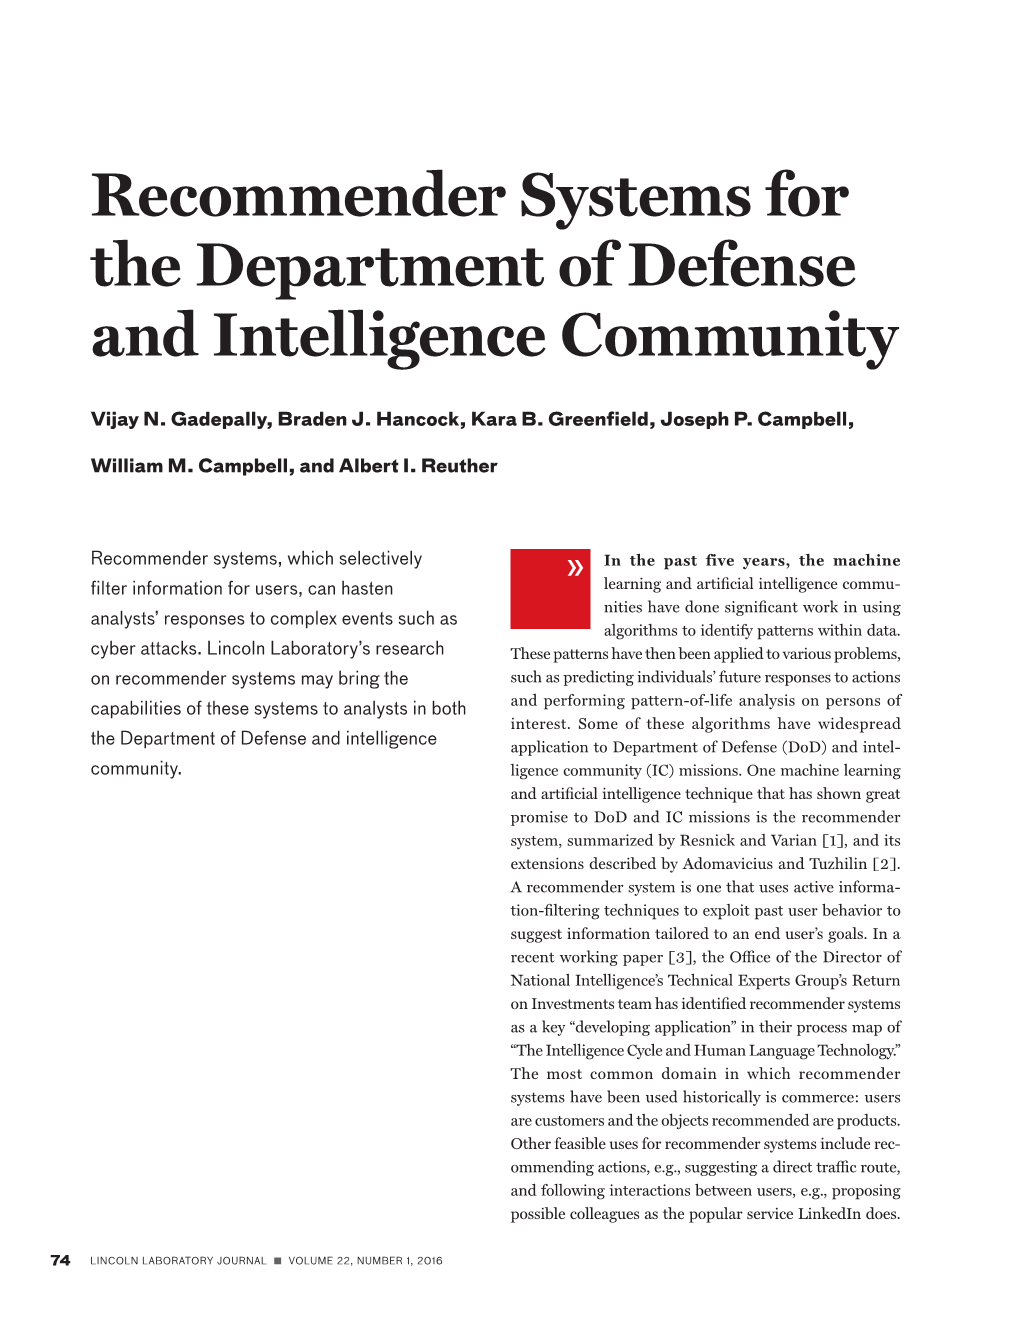 Recommender Systems for the Department of Defense and Intelligence Community